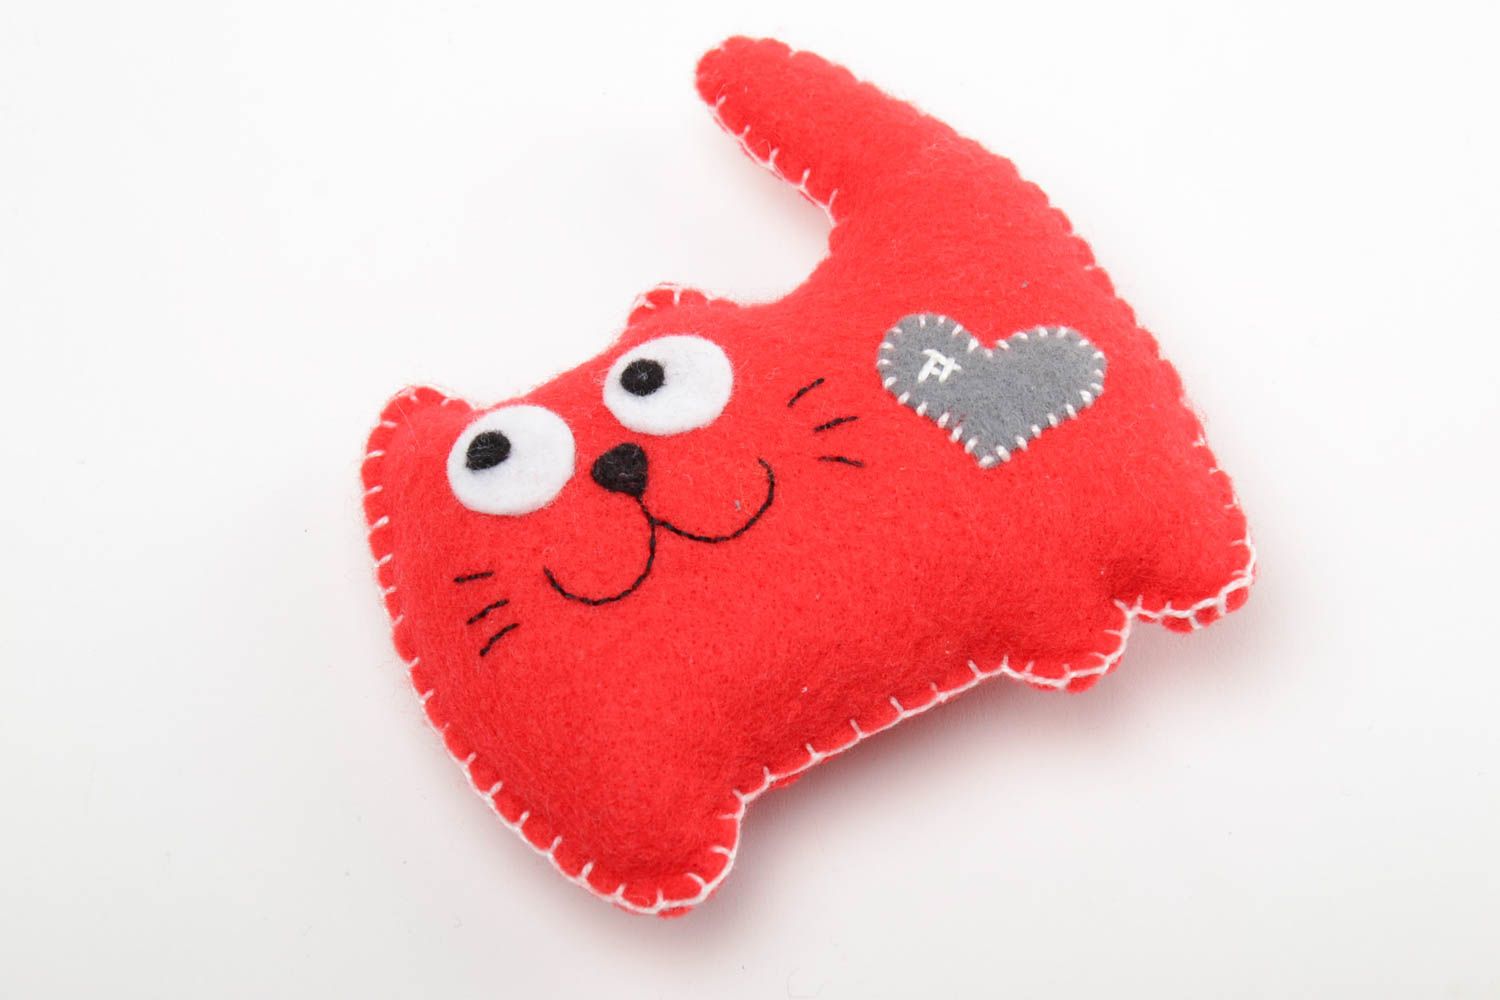 Handmade small red felt soft toy red cat with gray heart for kids and decor photo 2